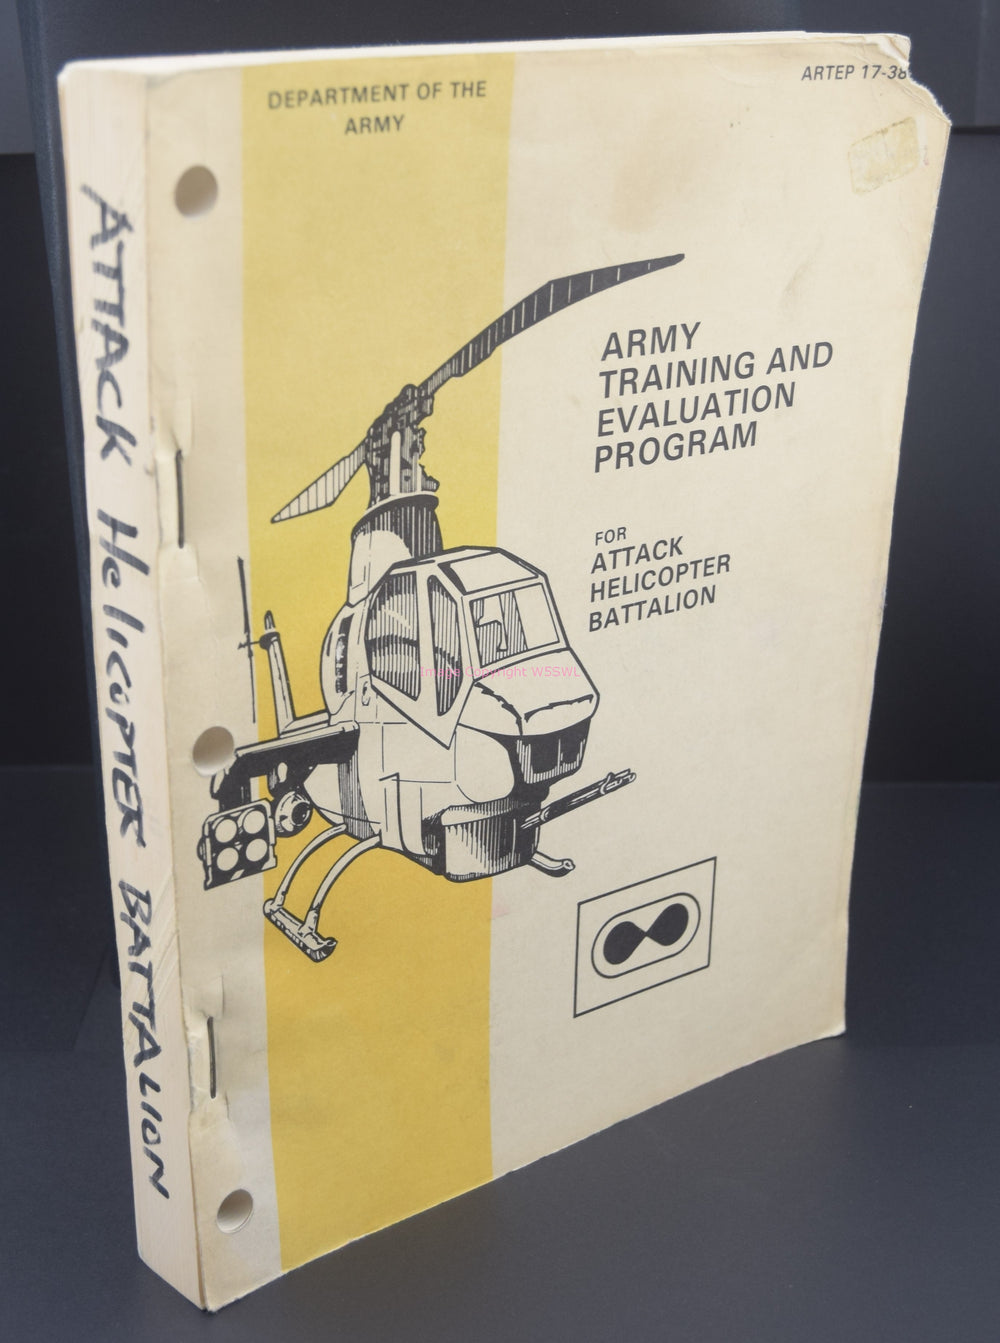 ARMY Training And Evaluation Program for Attack Helicopter Battalion ARTEP 17-385 - Dave's Hobby Shop by W5SWL